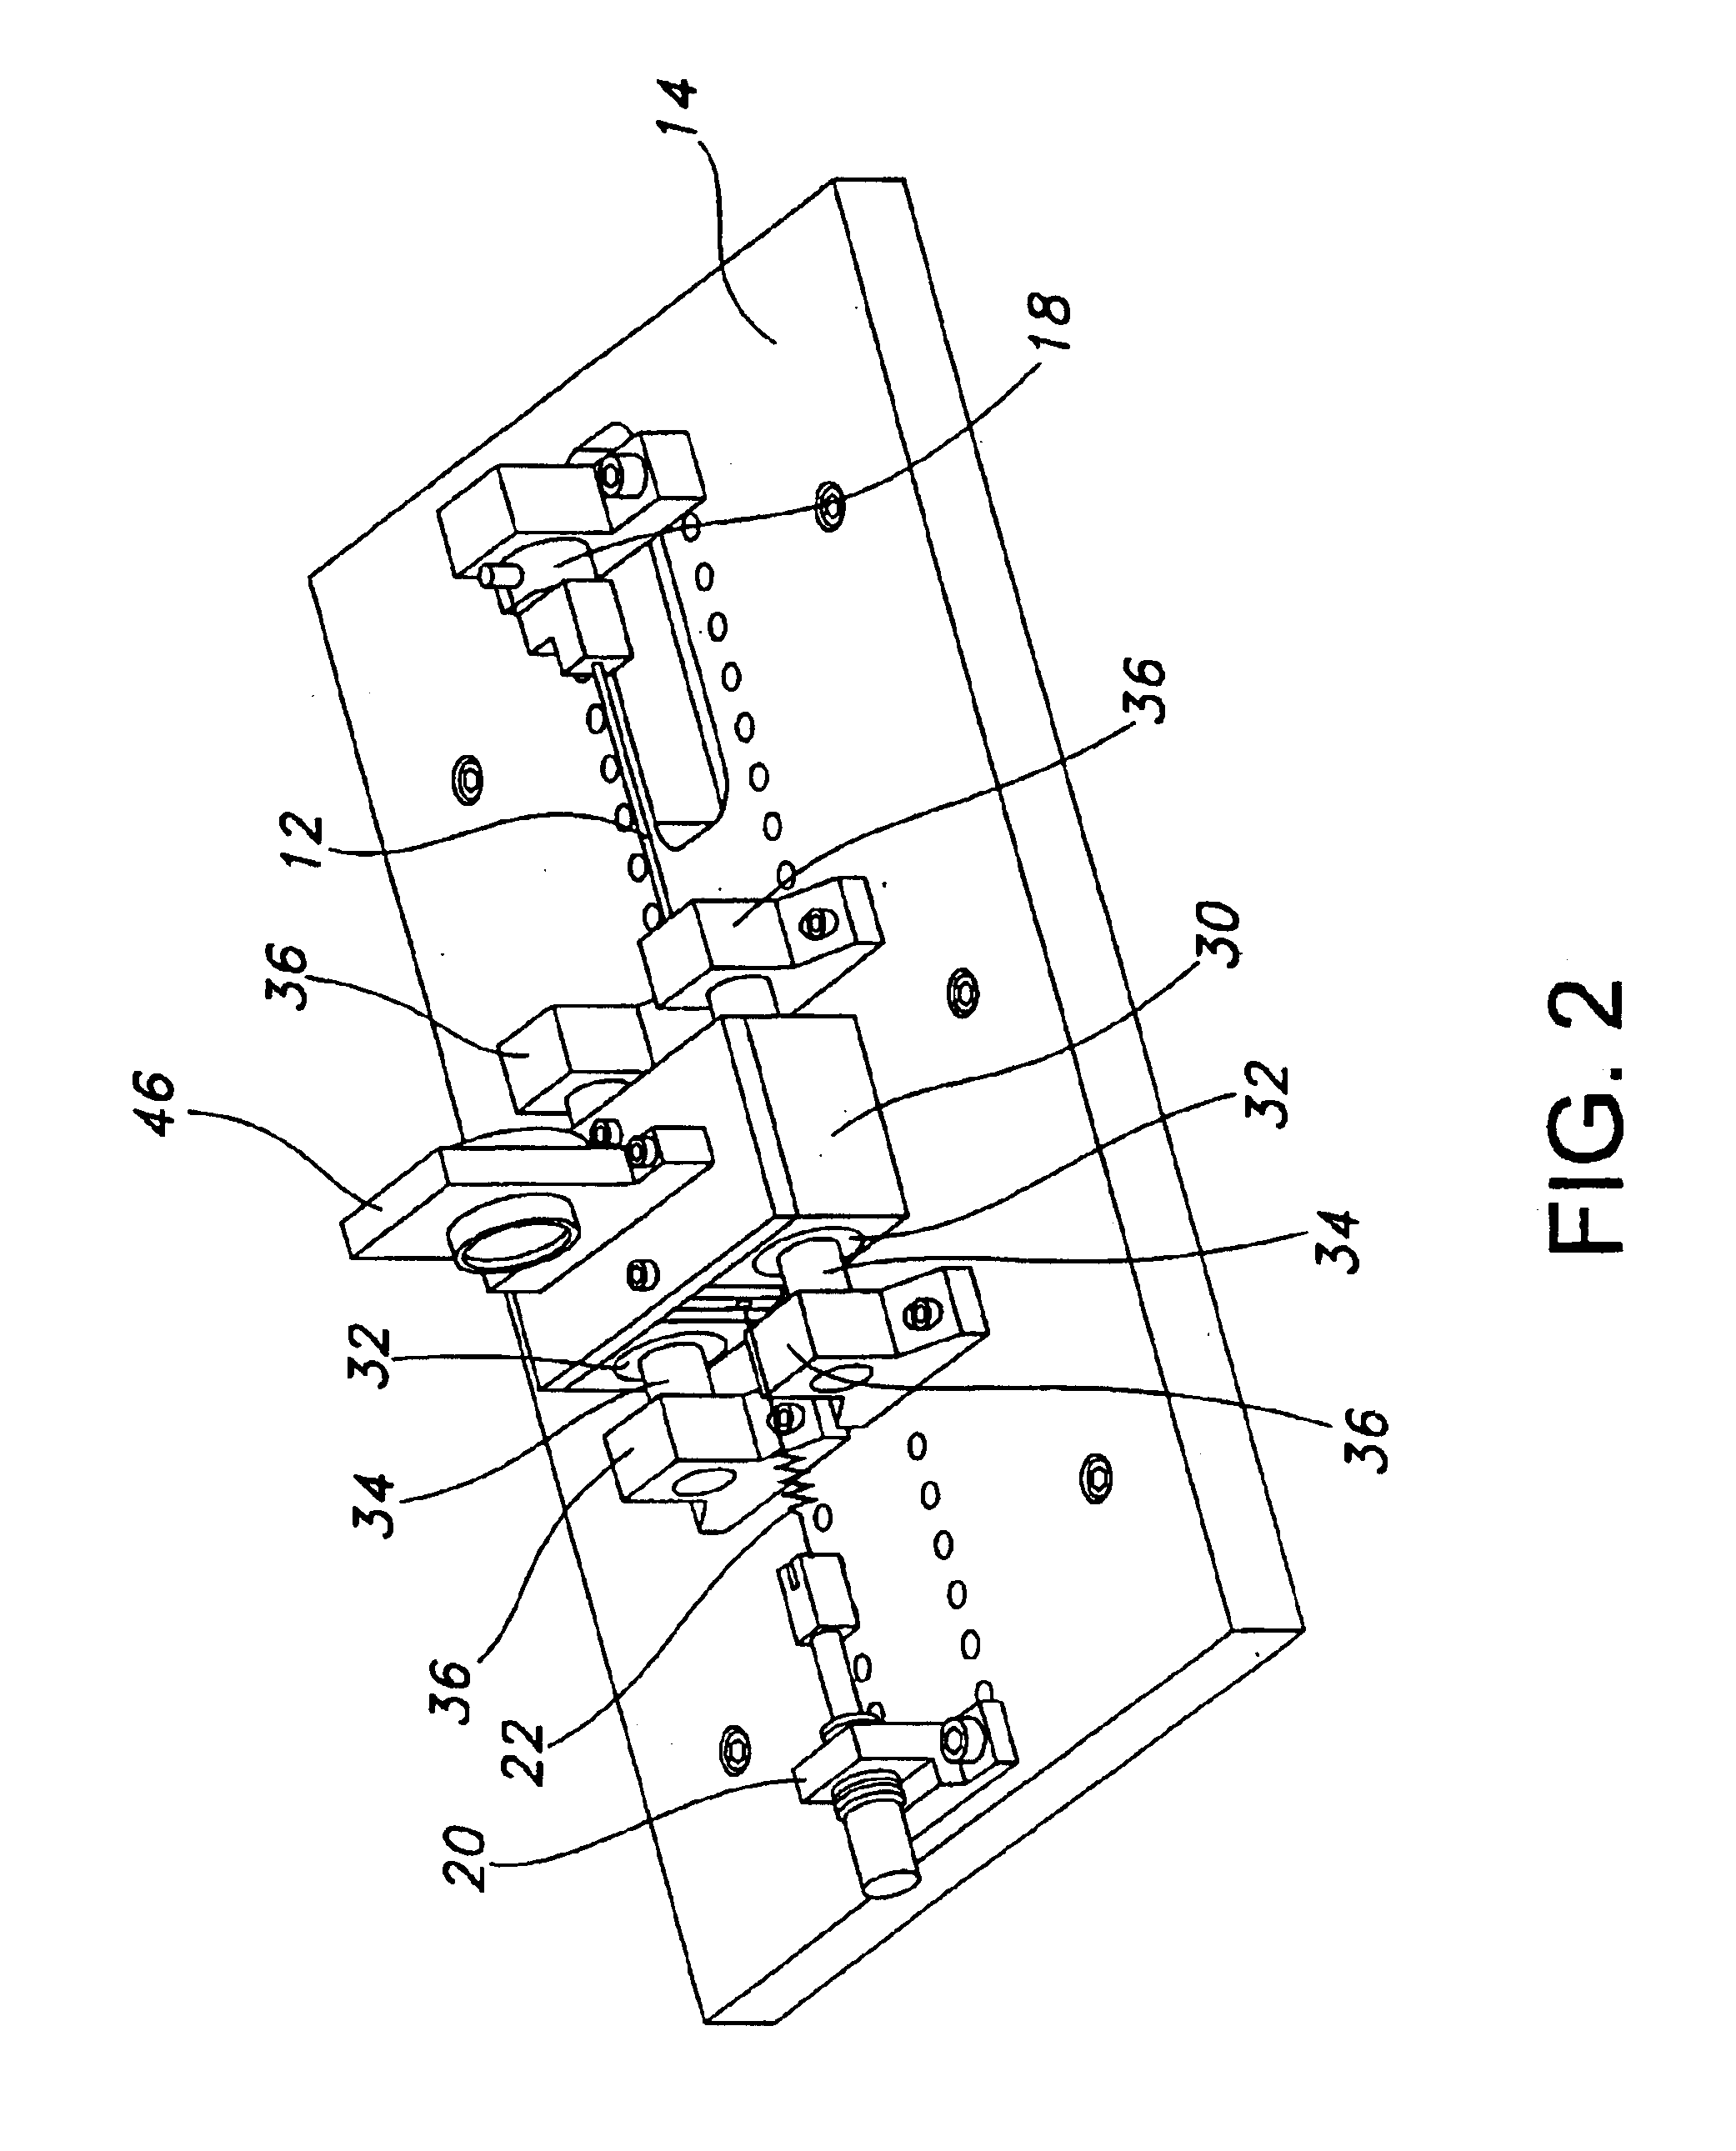 System and device for characterizing shape memory alloy wires